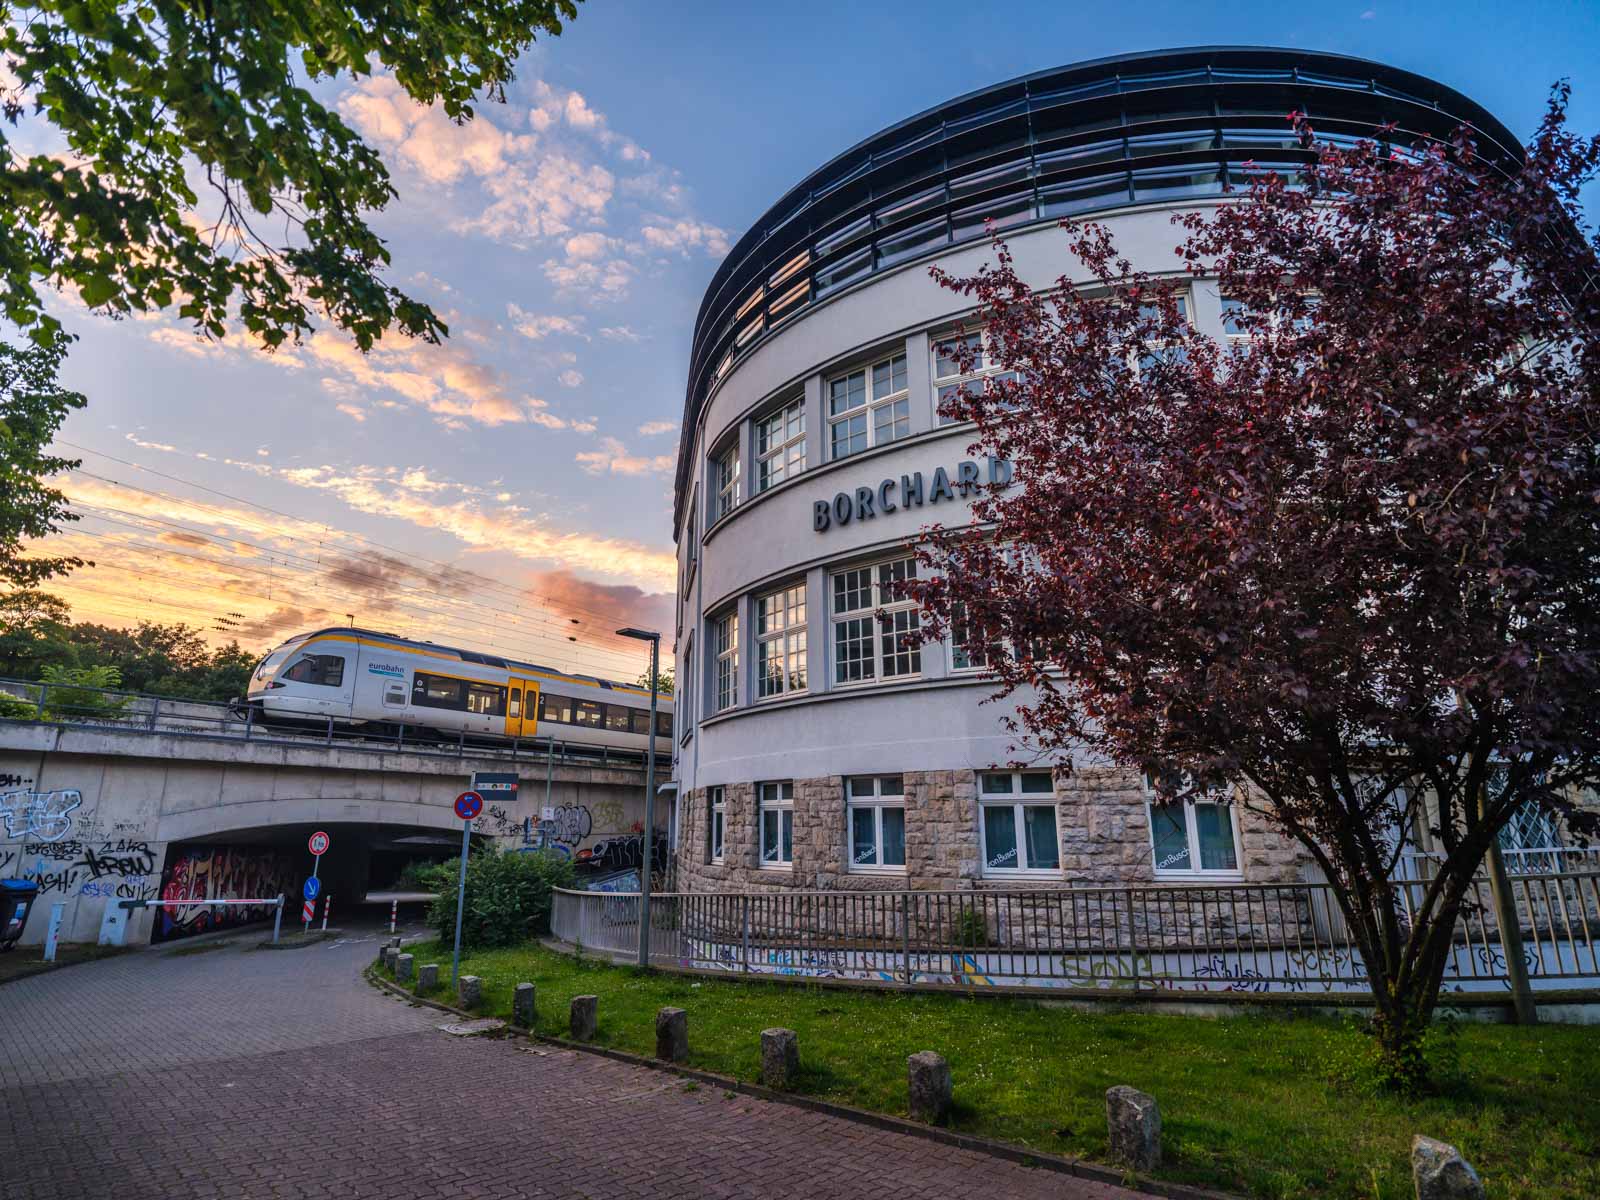 KONTOR building at the railroad embankment at sunset in July 2021 (Bielefeld, Germany).